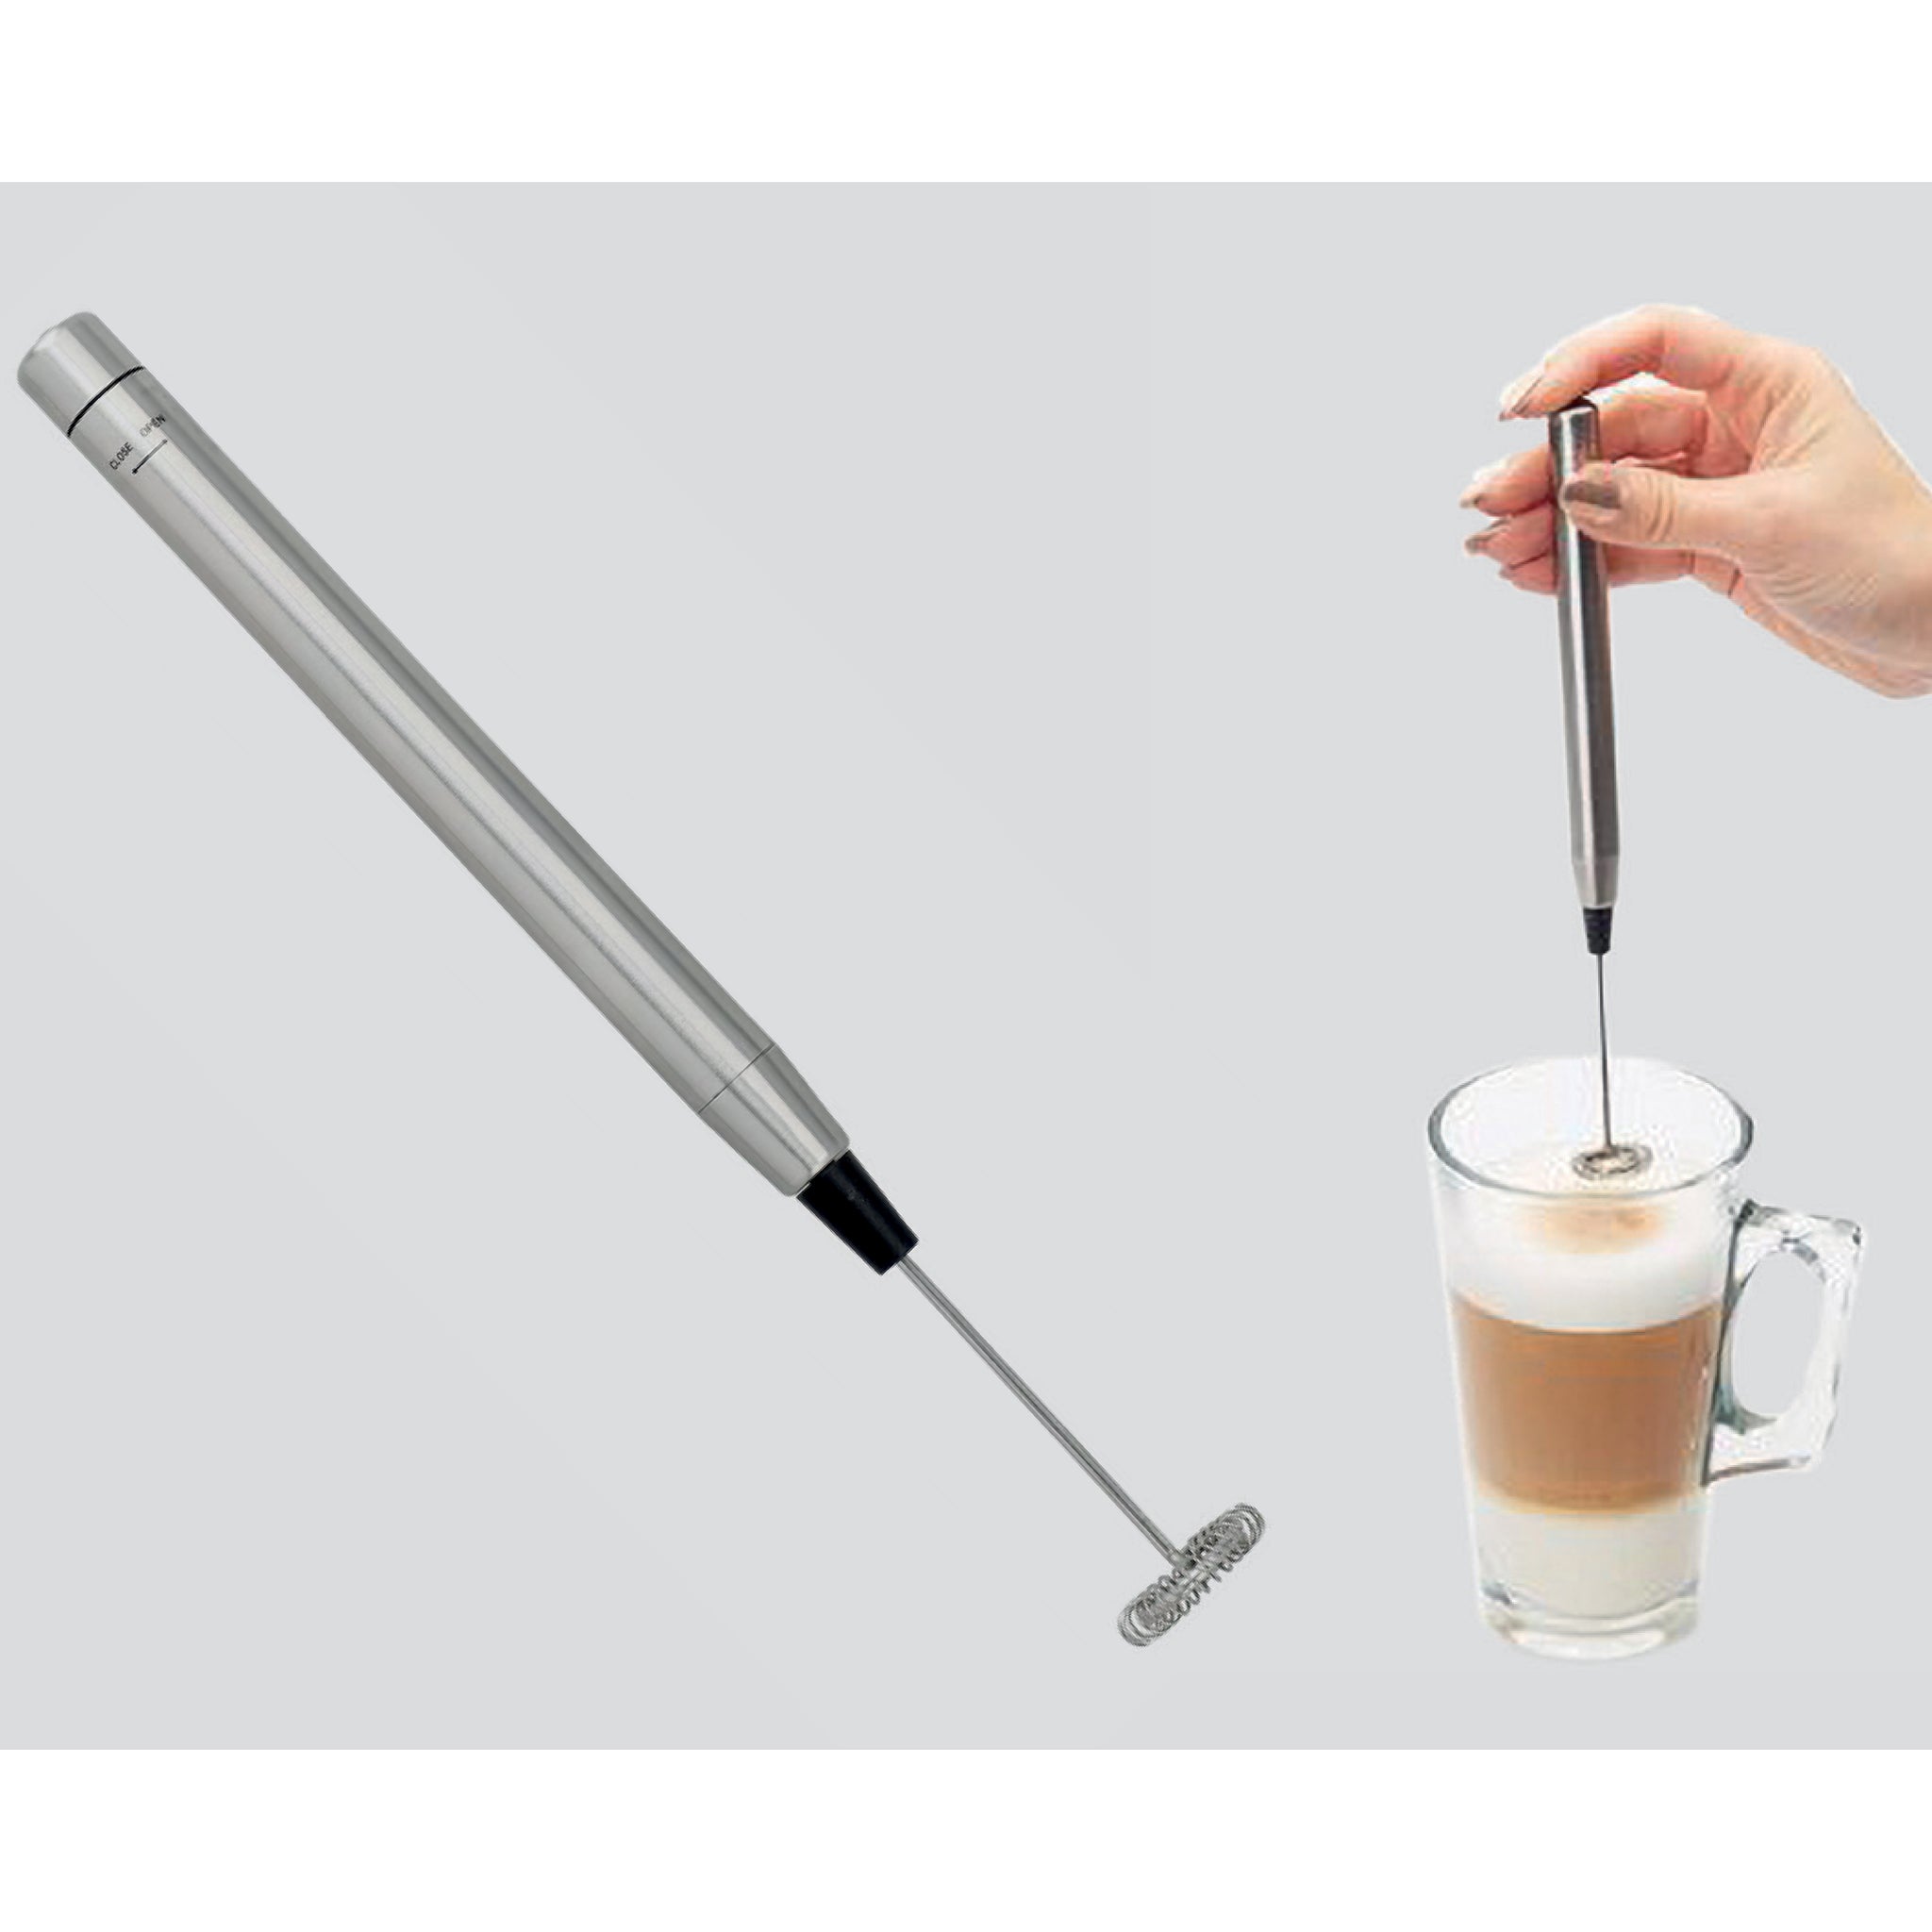 Give your hot drinks a professional finishing touch!